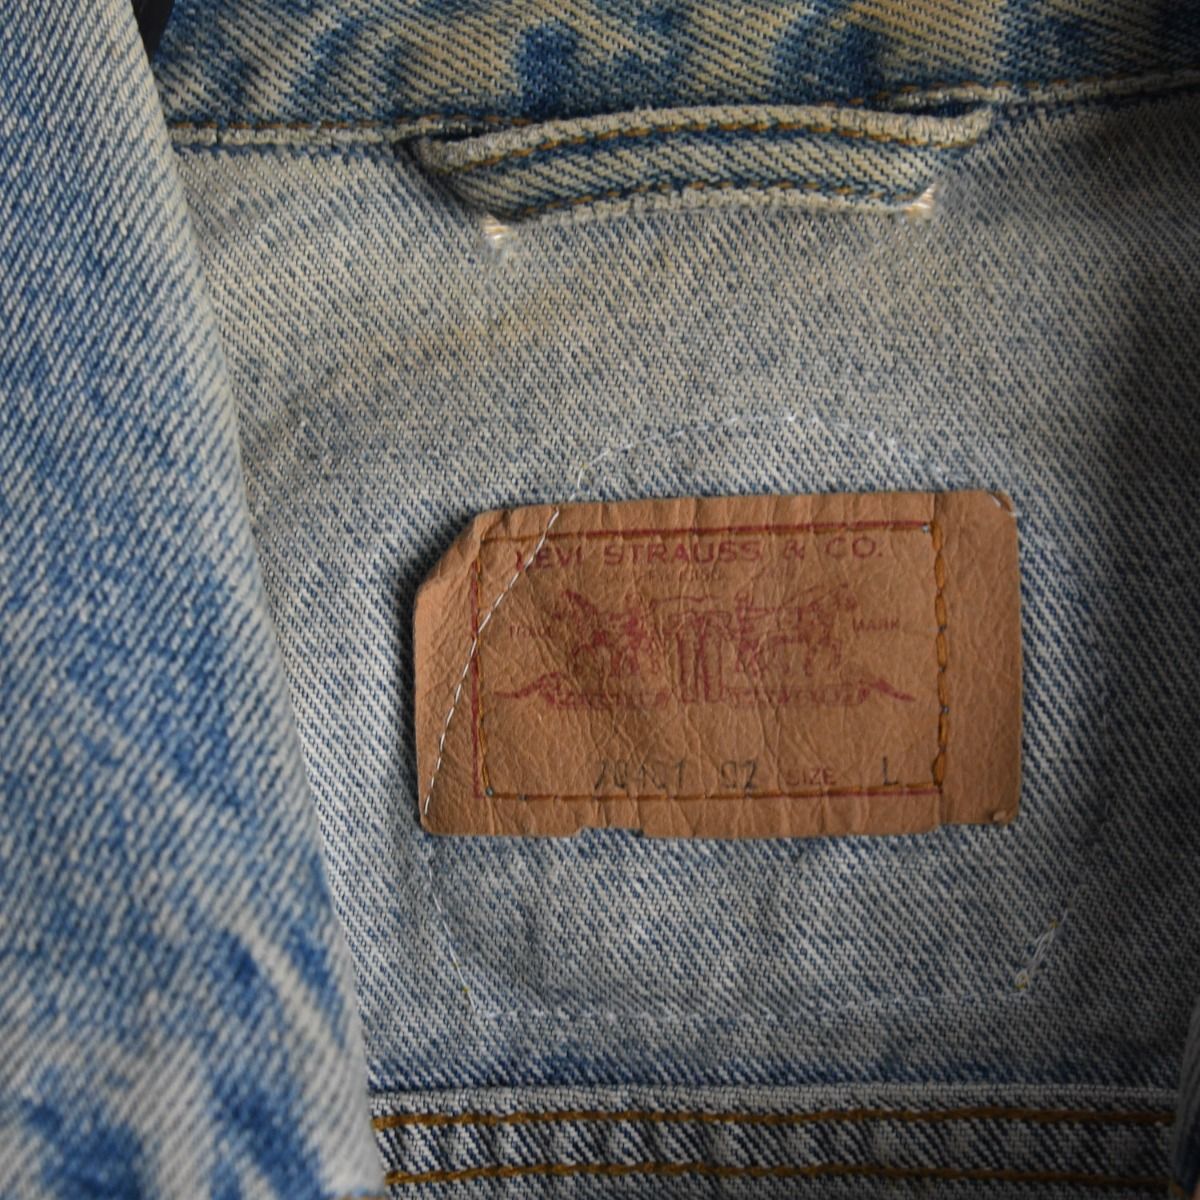 Levi’s Early 1990s Denim Vest w/ Racing Patches